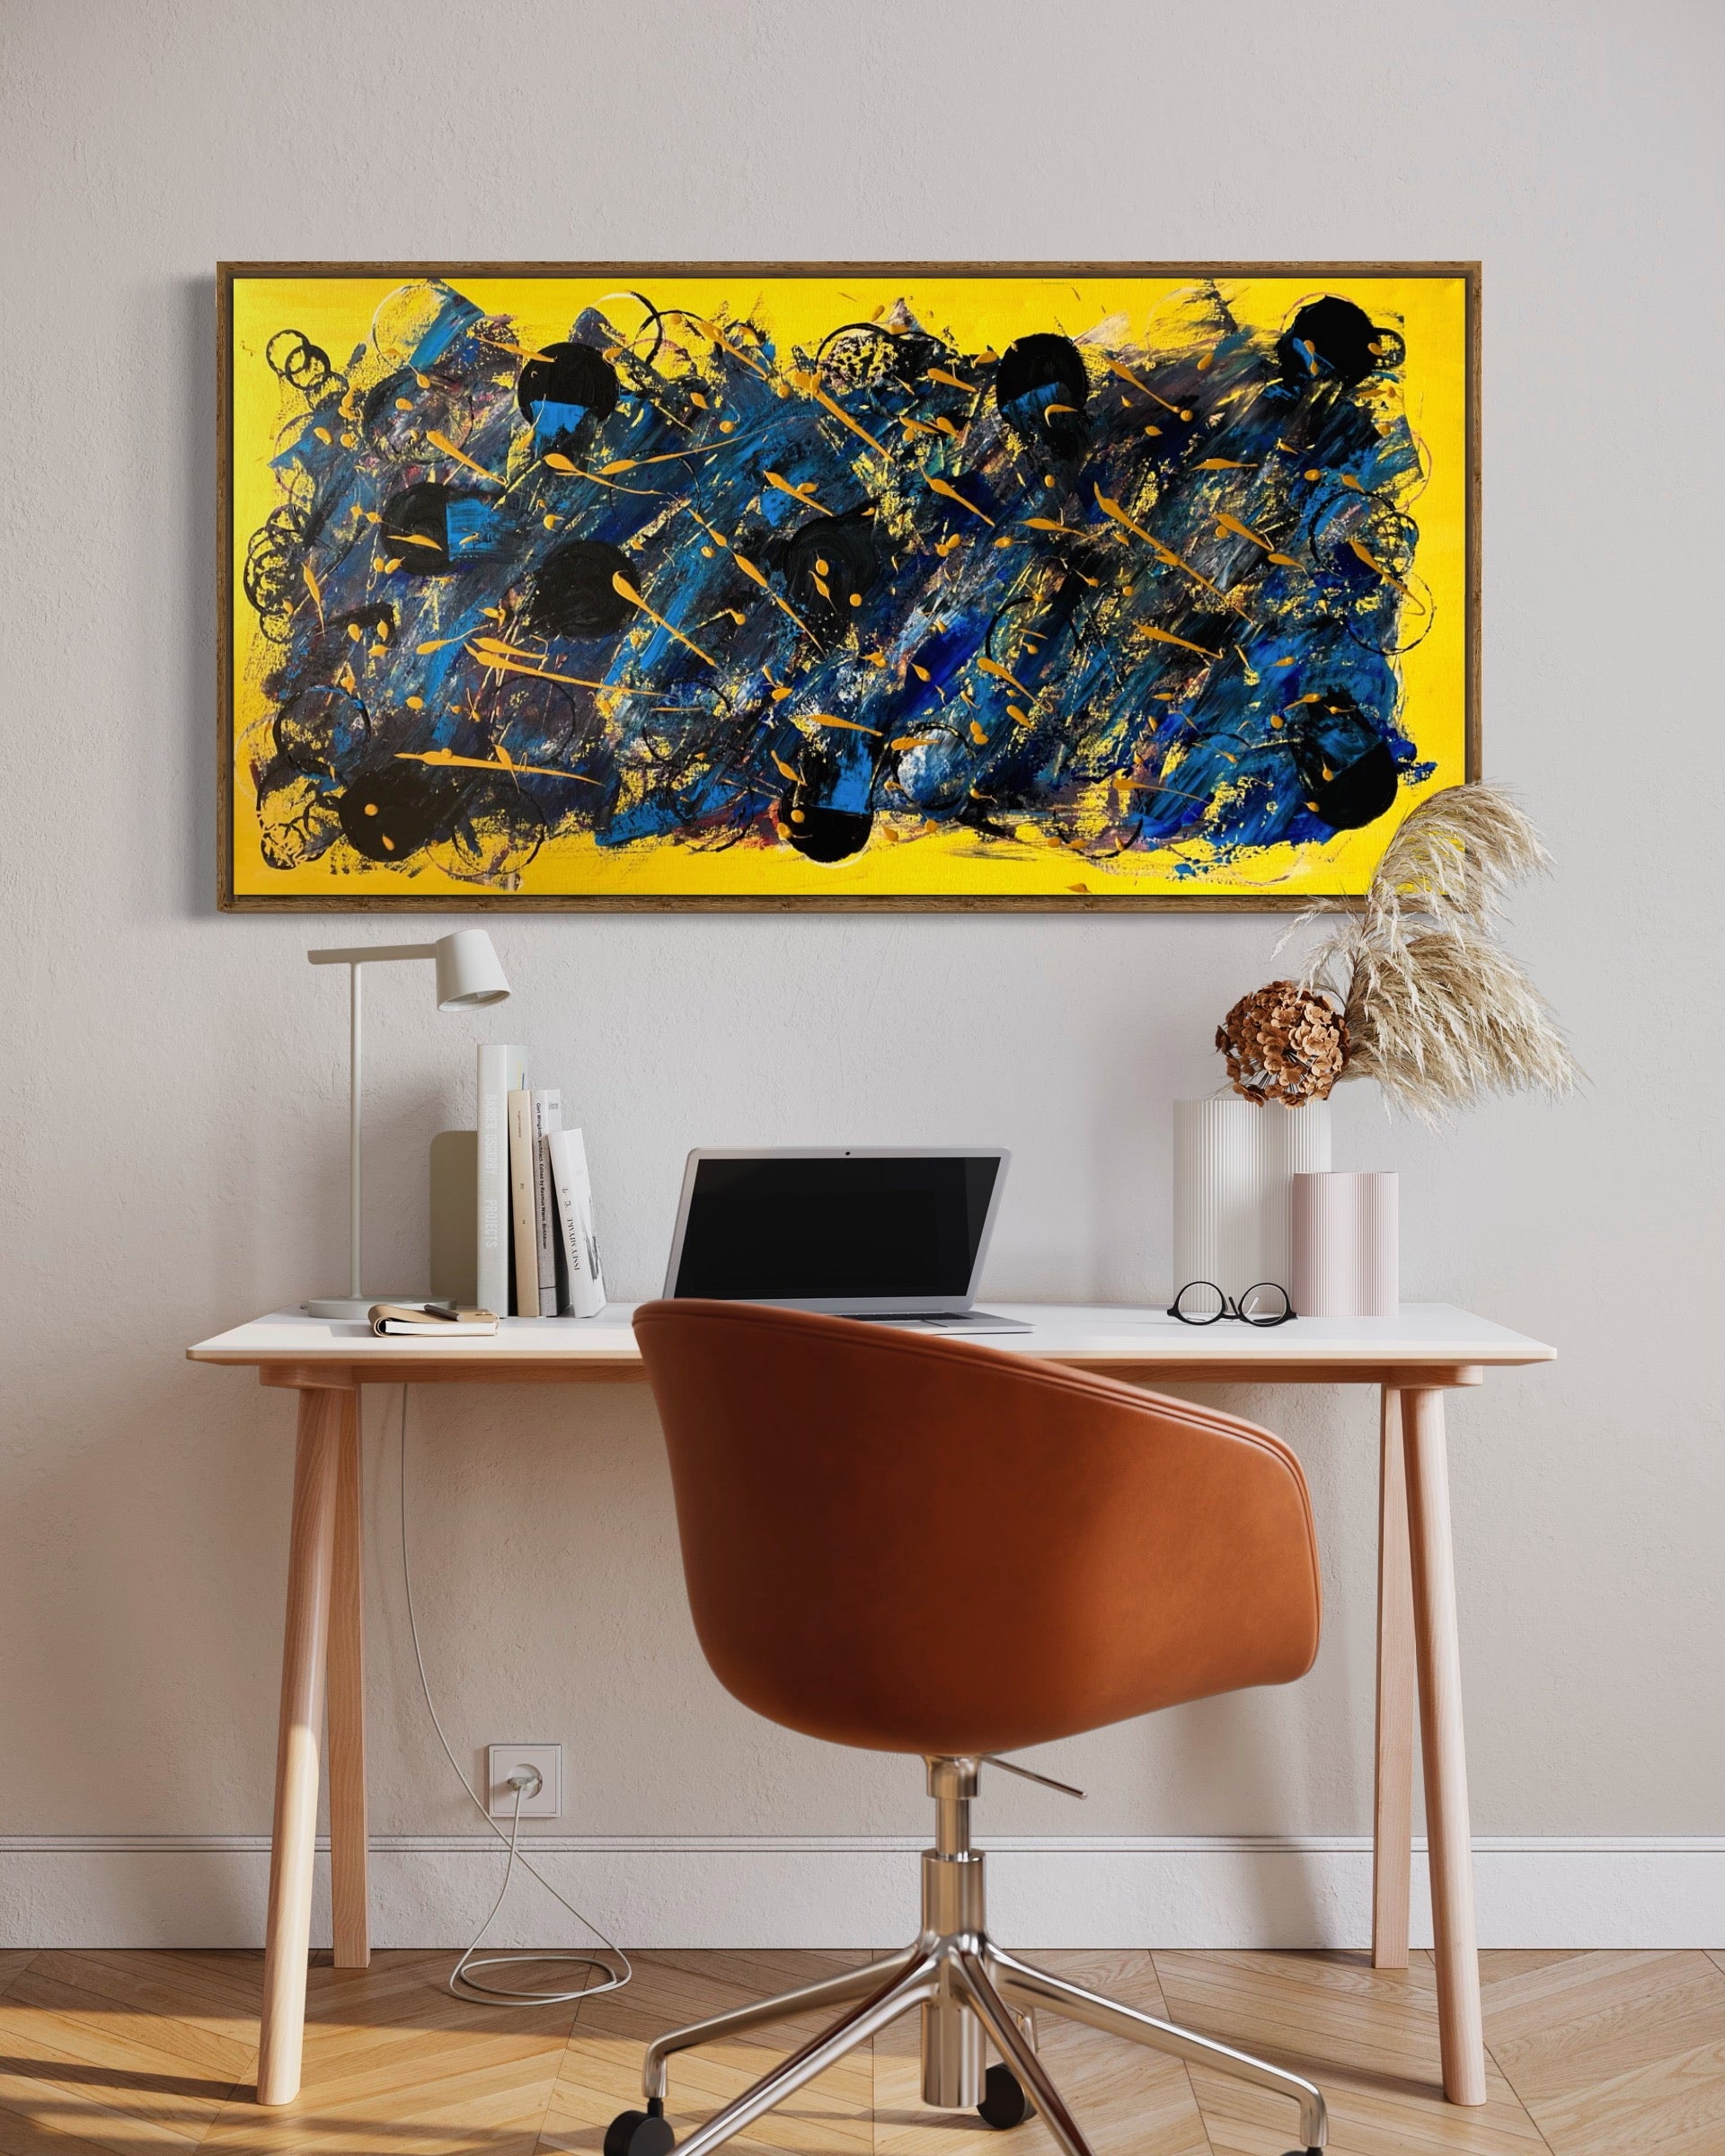 Universe 61cm x 122cm Yellow Blue Textured Abstract Painting